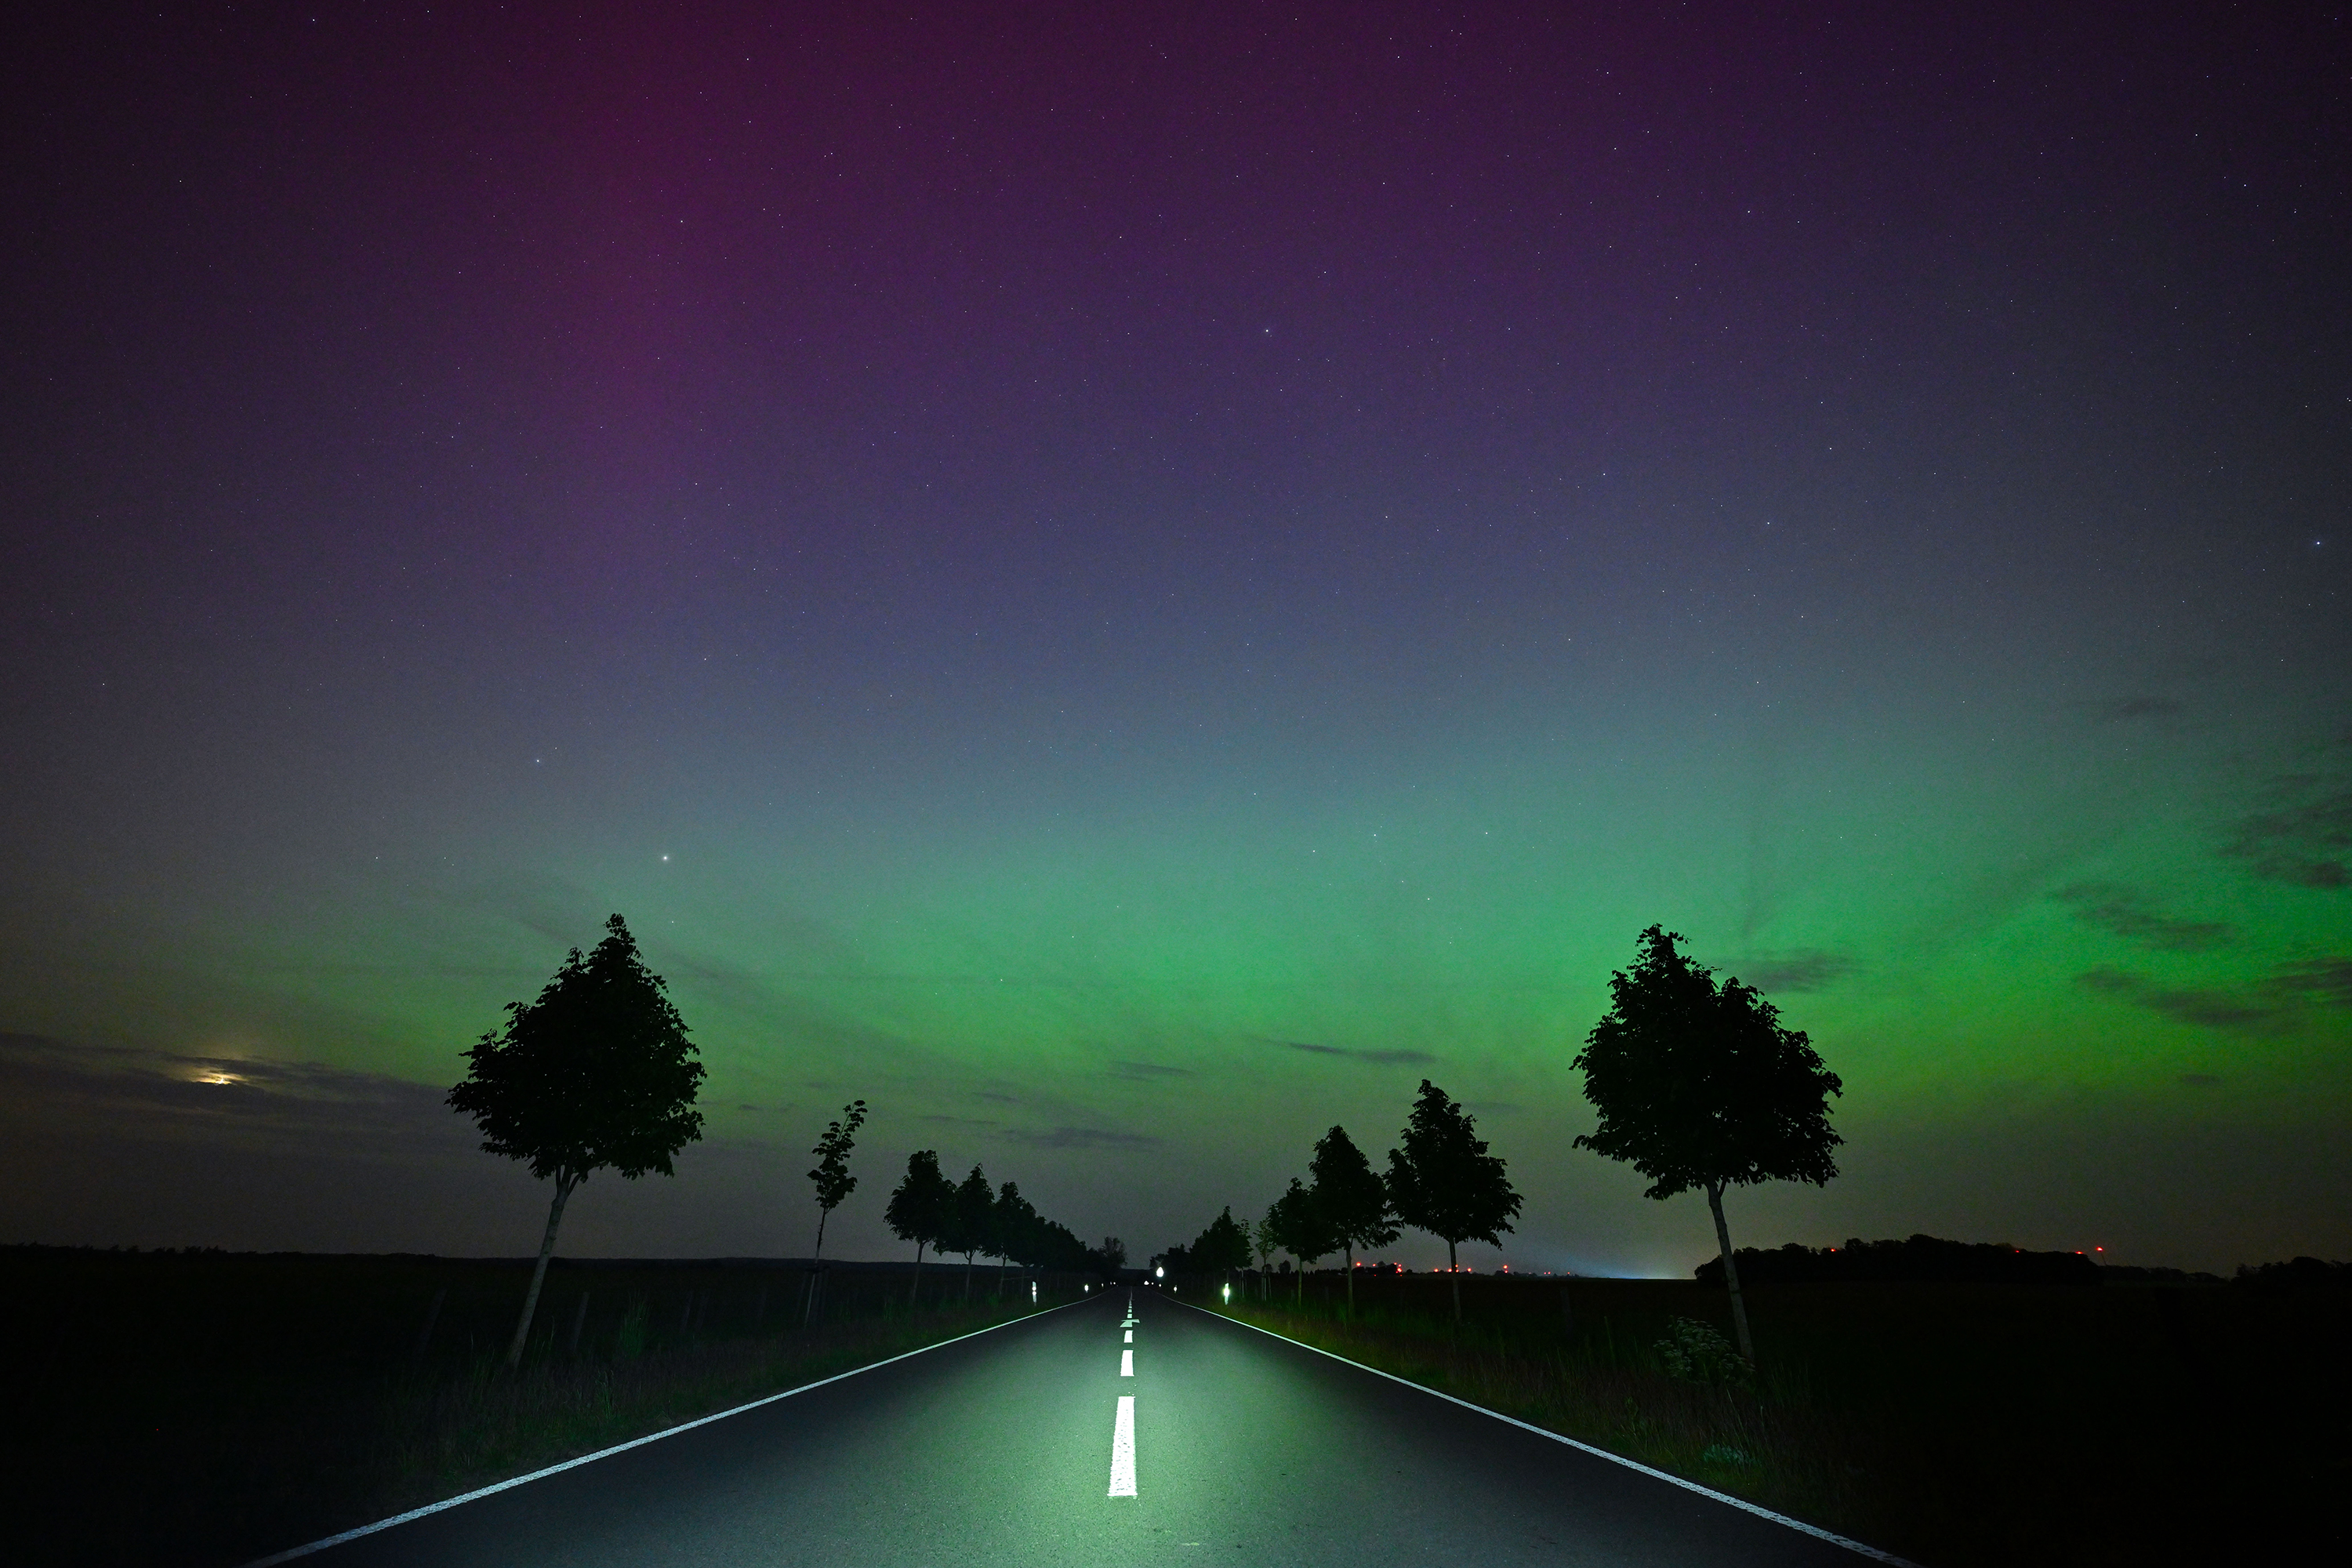 The northern lights glow in the night sky in Brandenburg, Germany, on May 10.